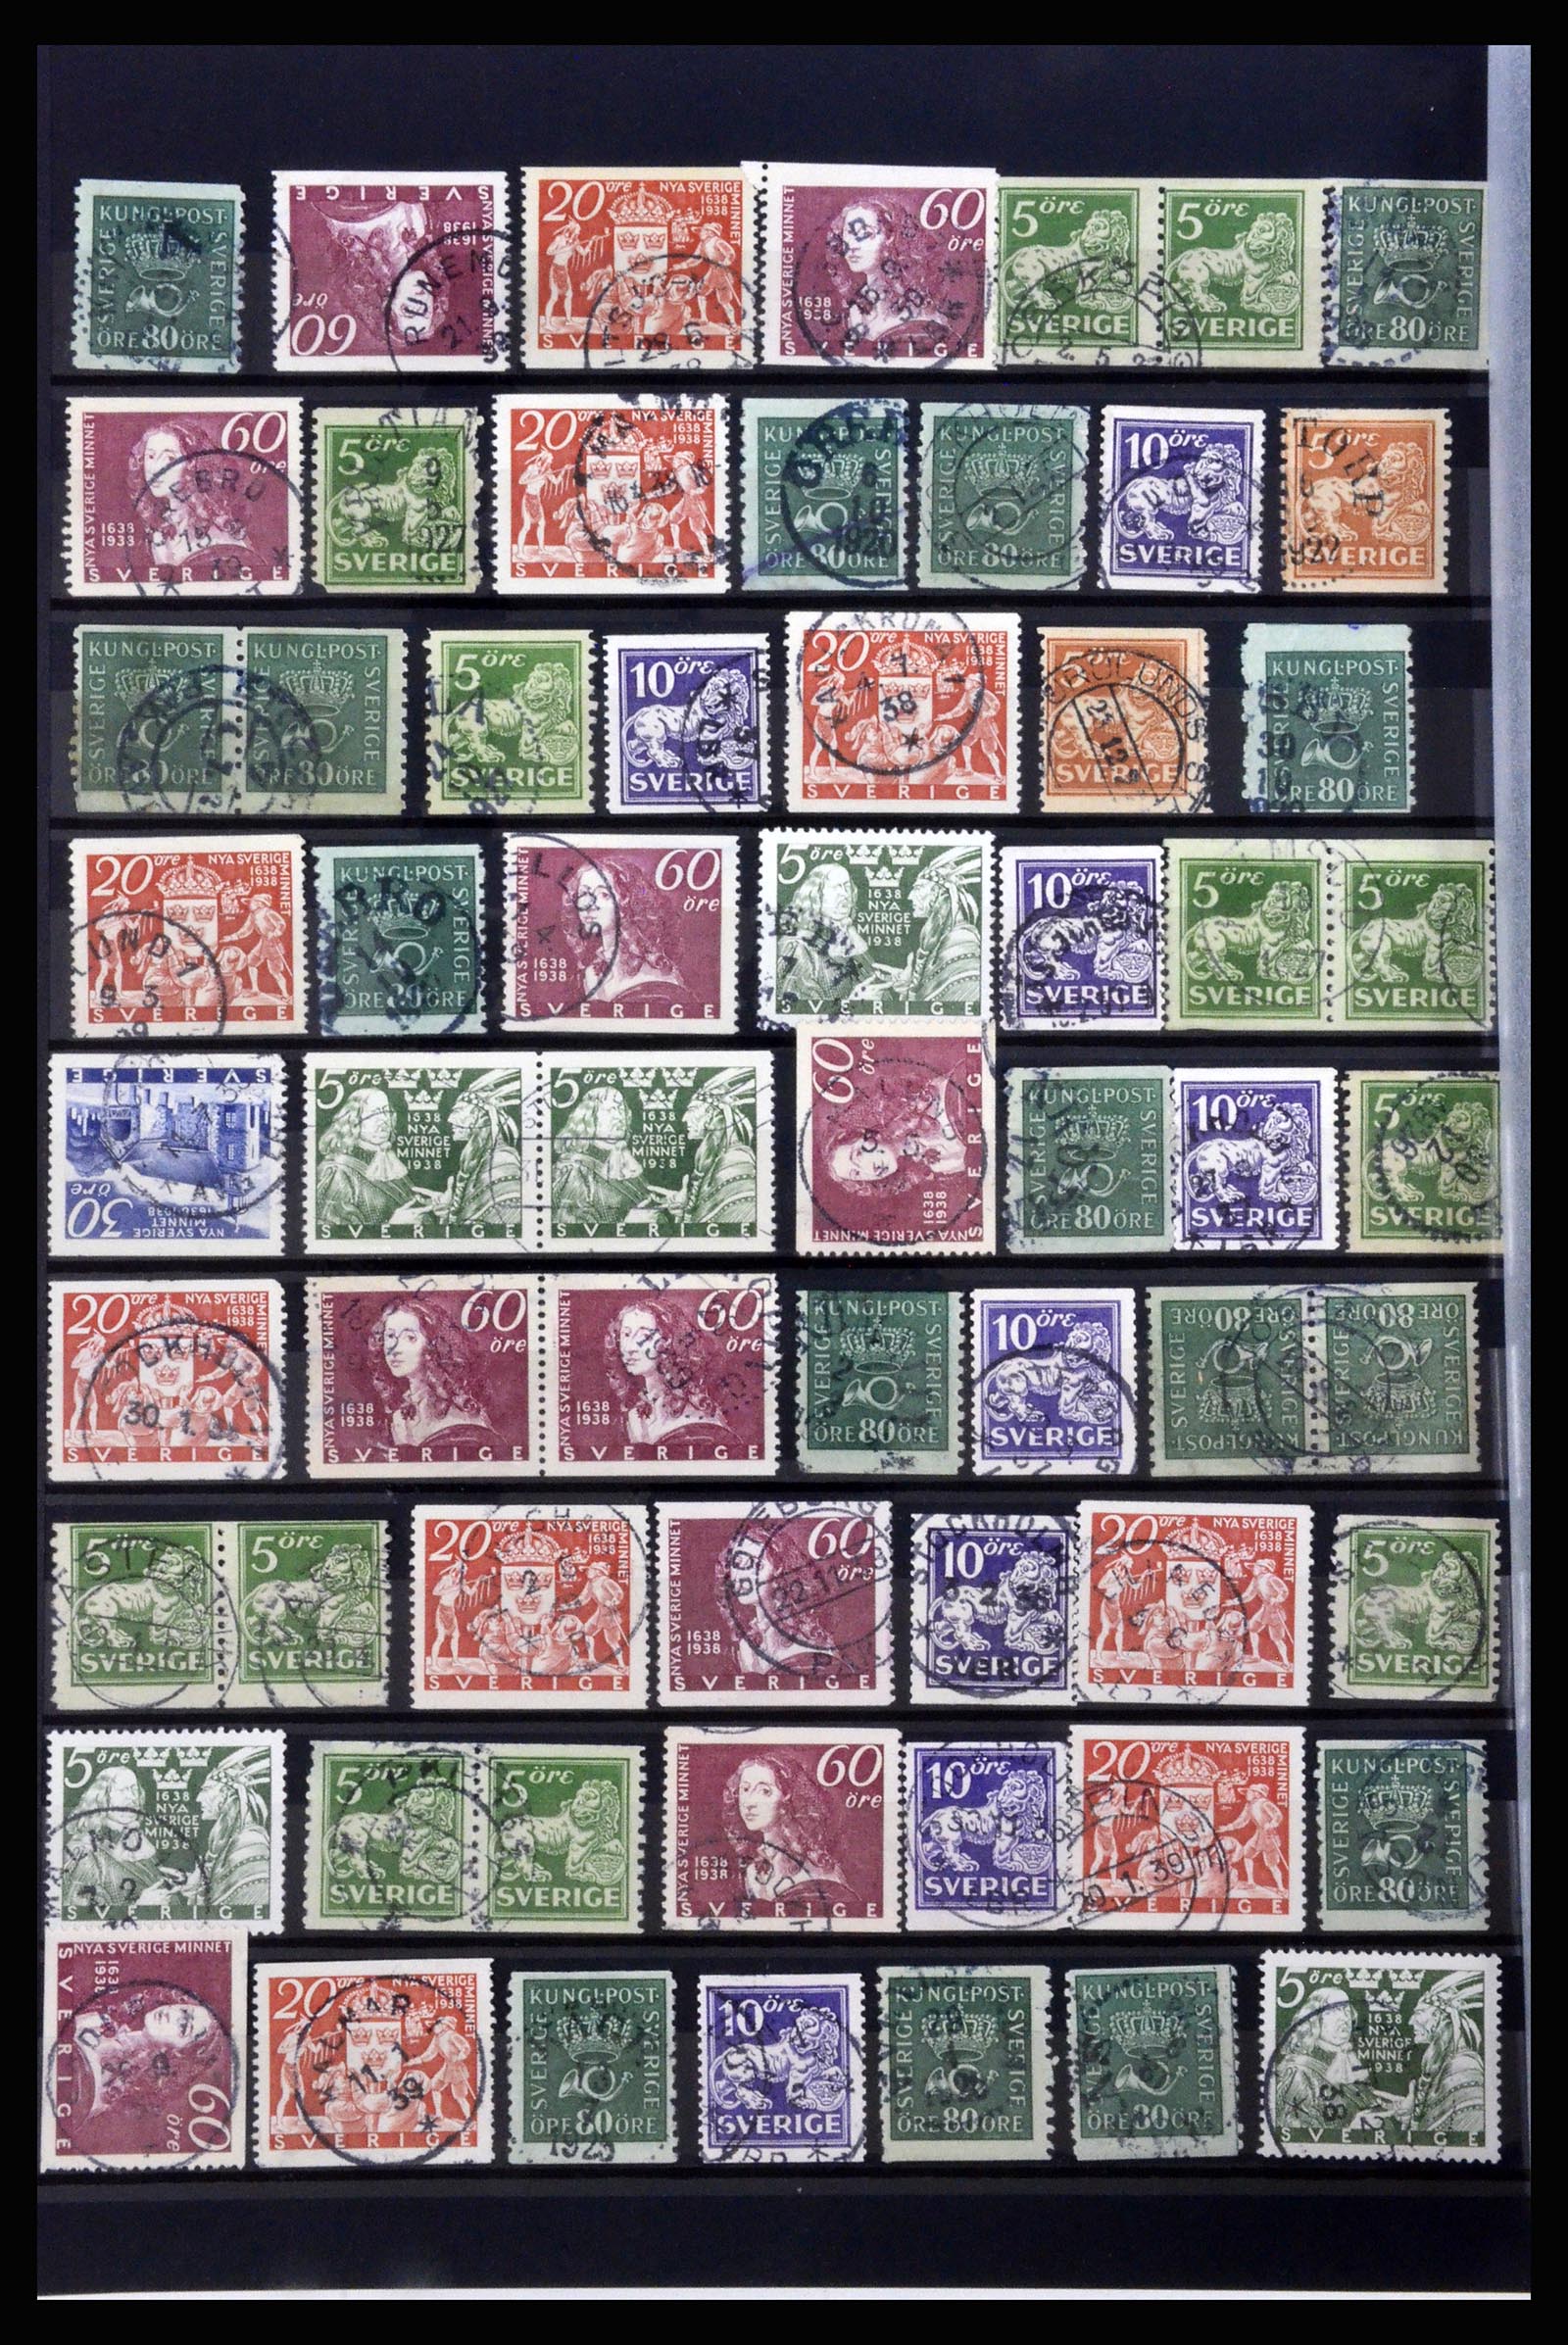 36316 036 - Stamp collection 36316 Sweden cancellations 1920-1938.